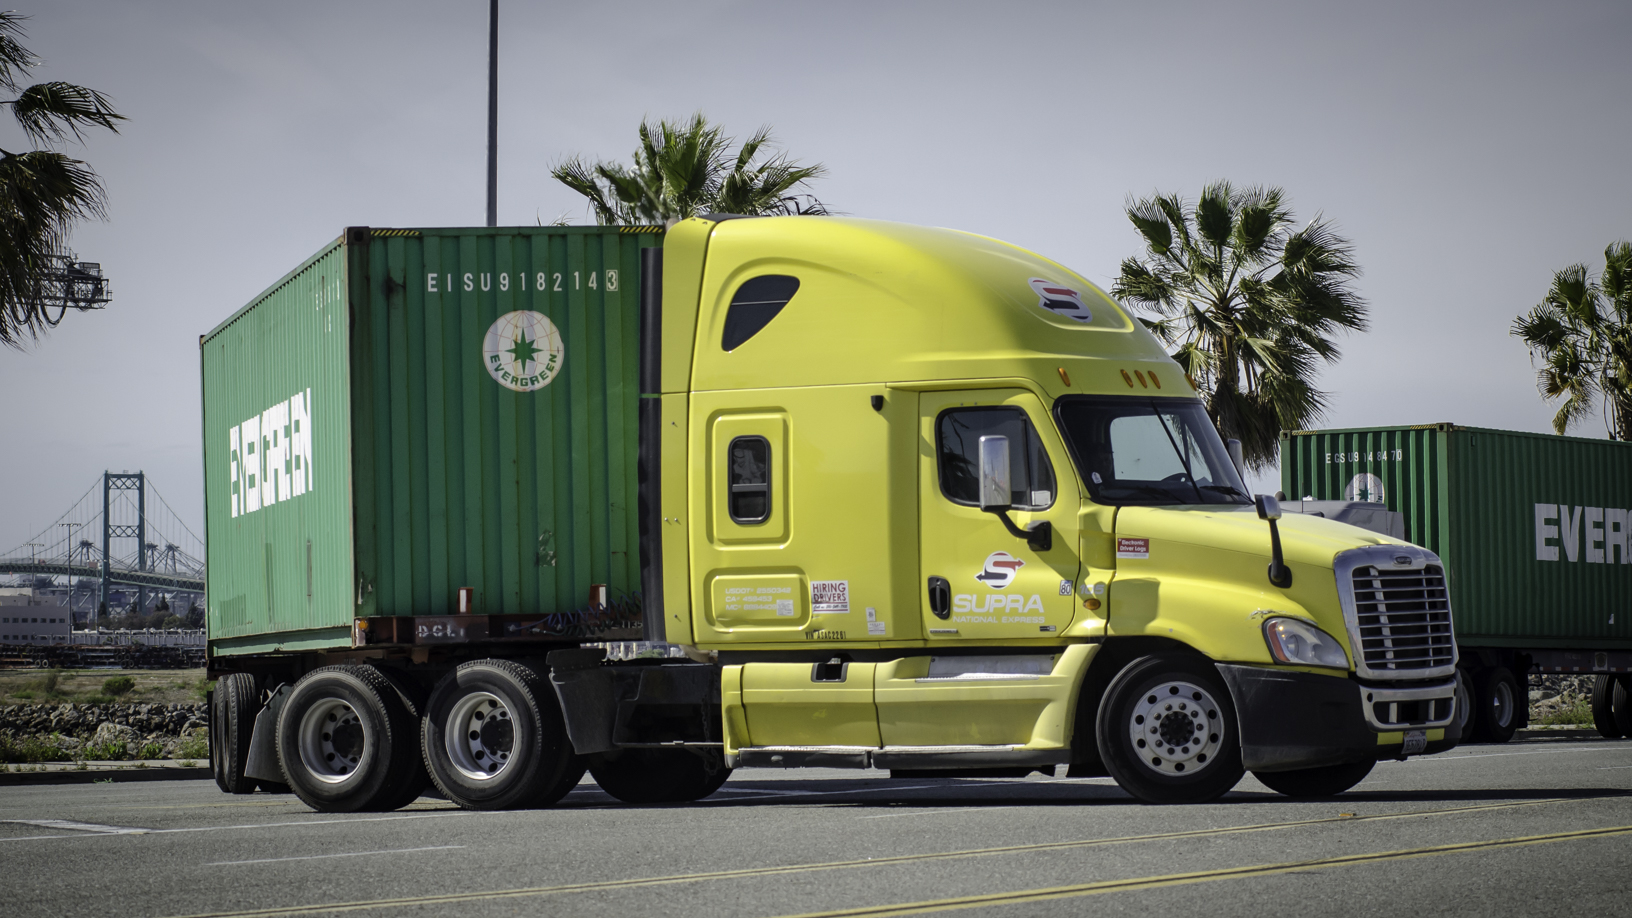 A yellow truck tractor with green trailer makes a turn.